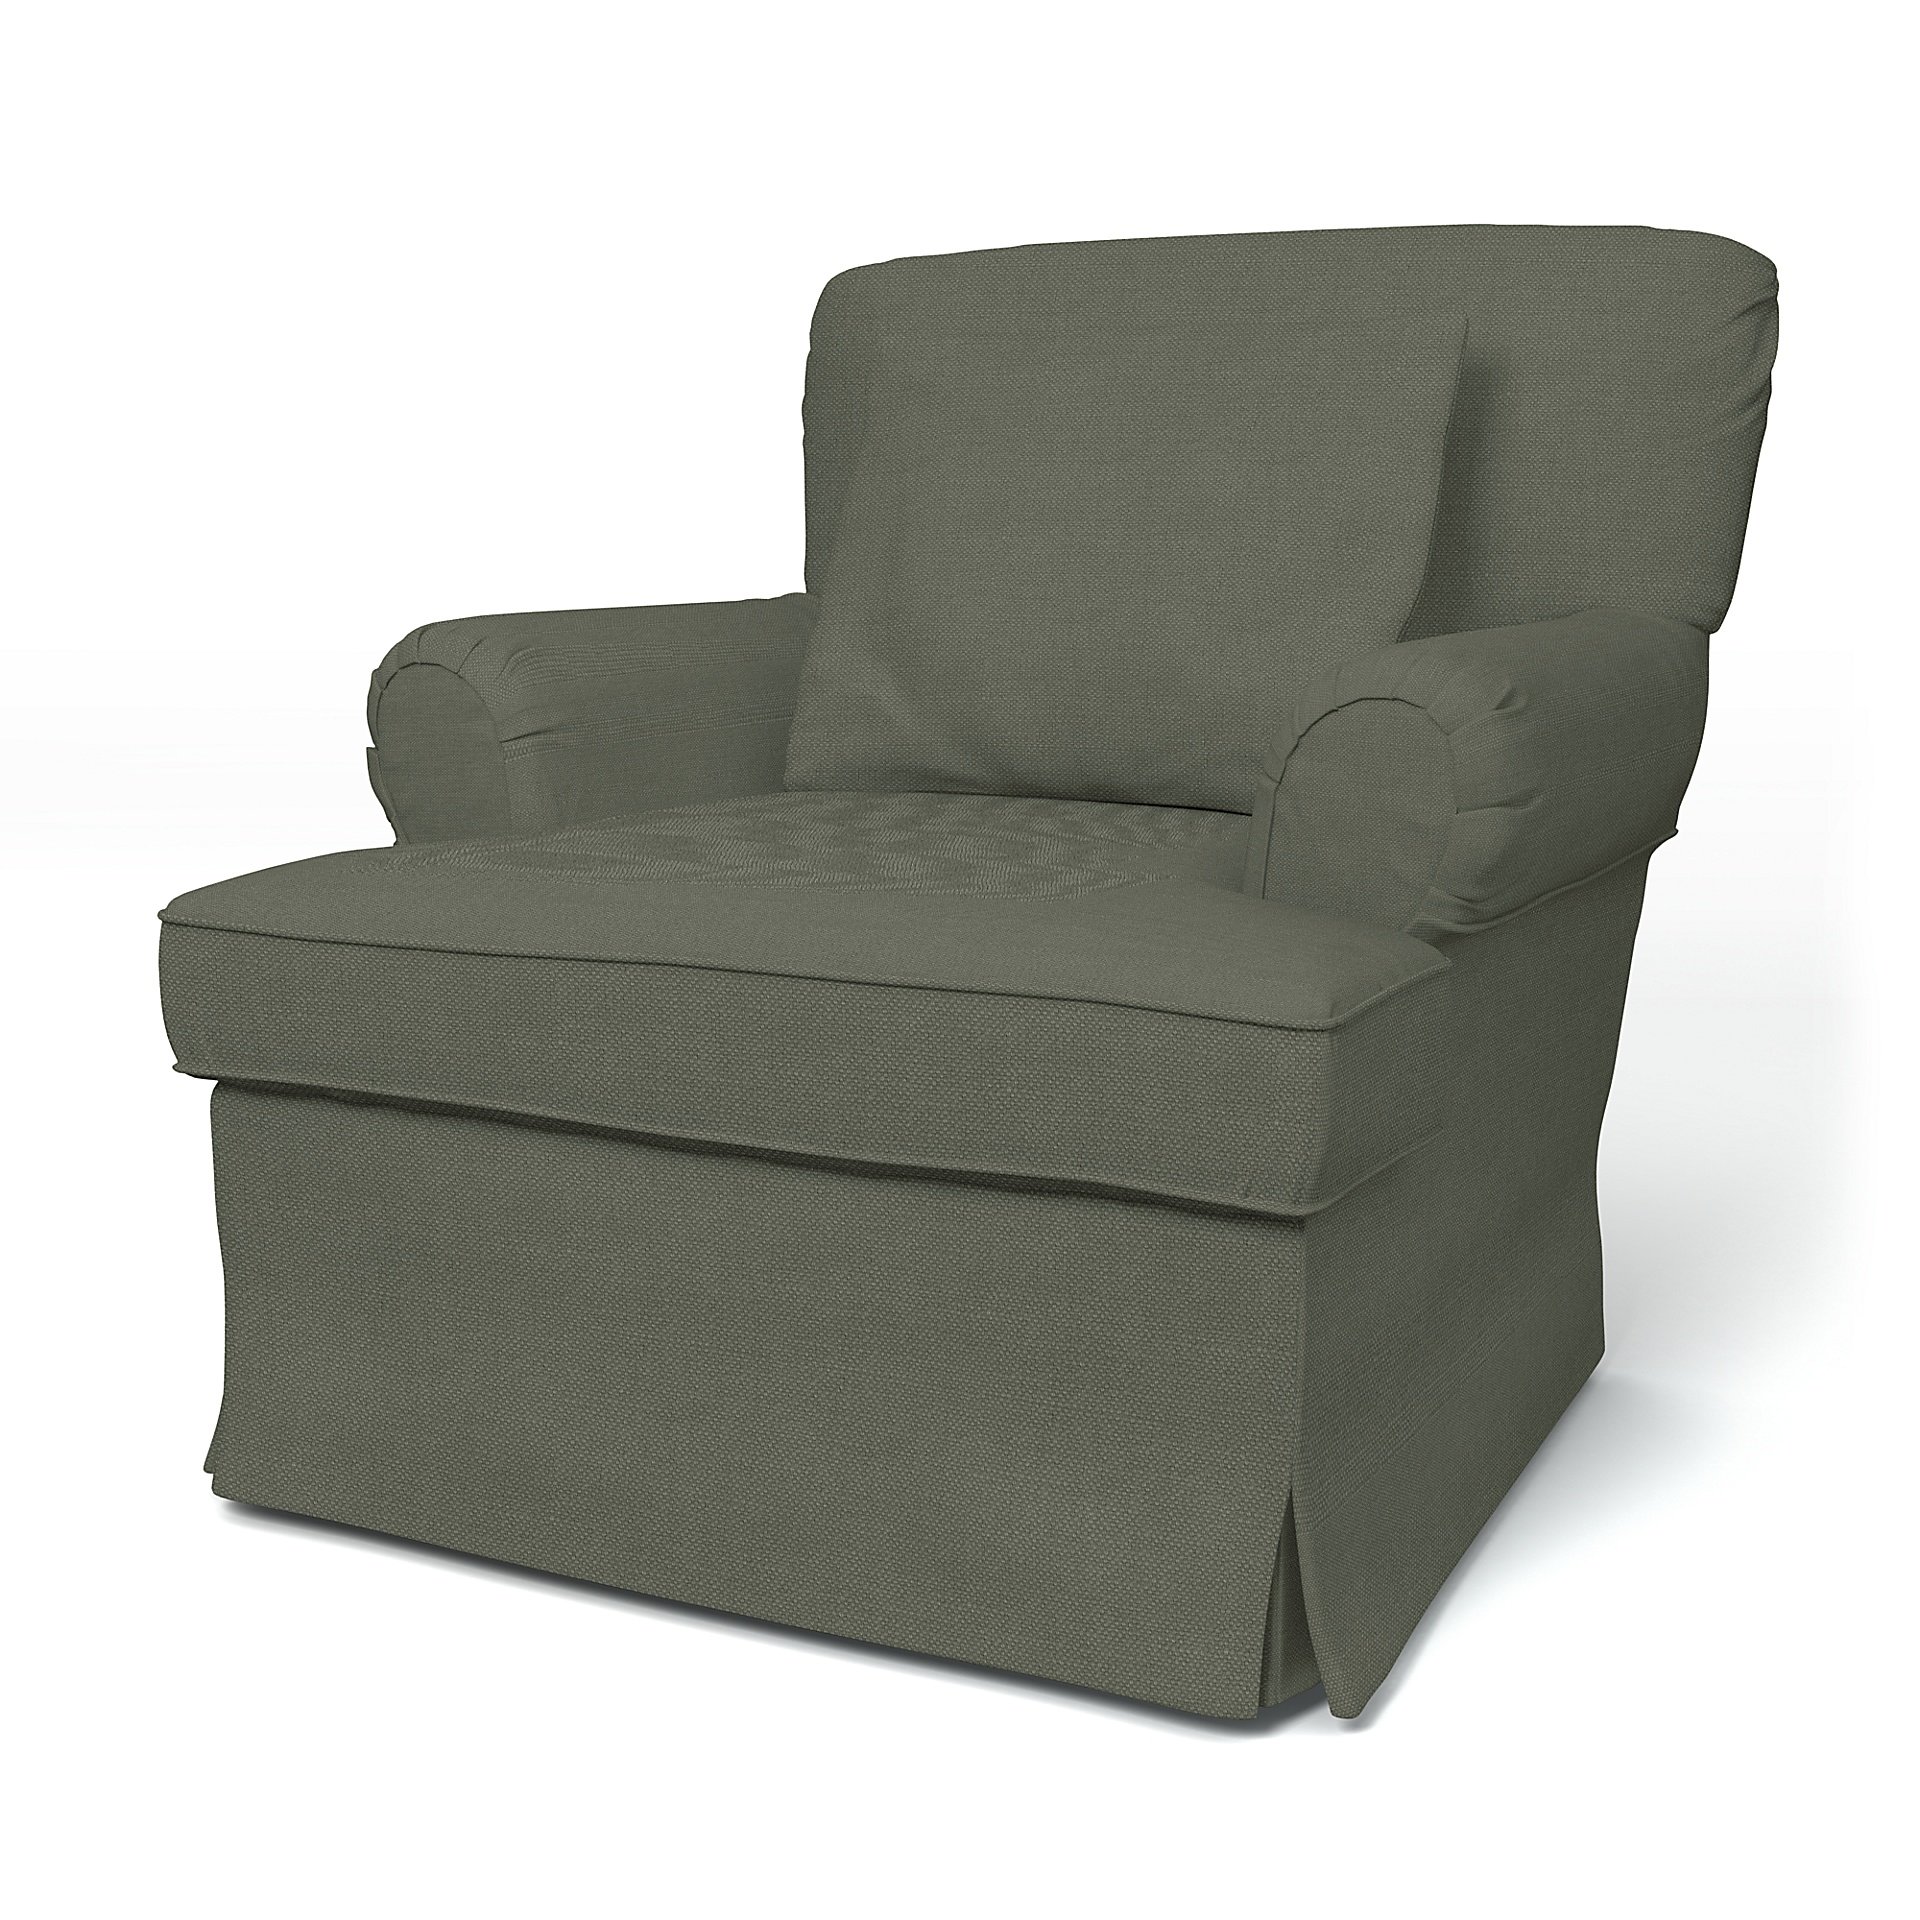 IKEA - Stockholm Armchair Cover (1994-2000) Small, Rosemary, Linen - Bemz